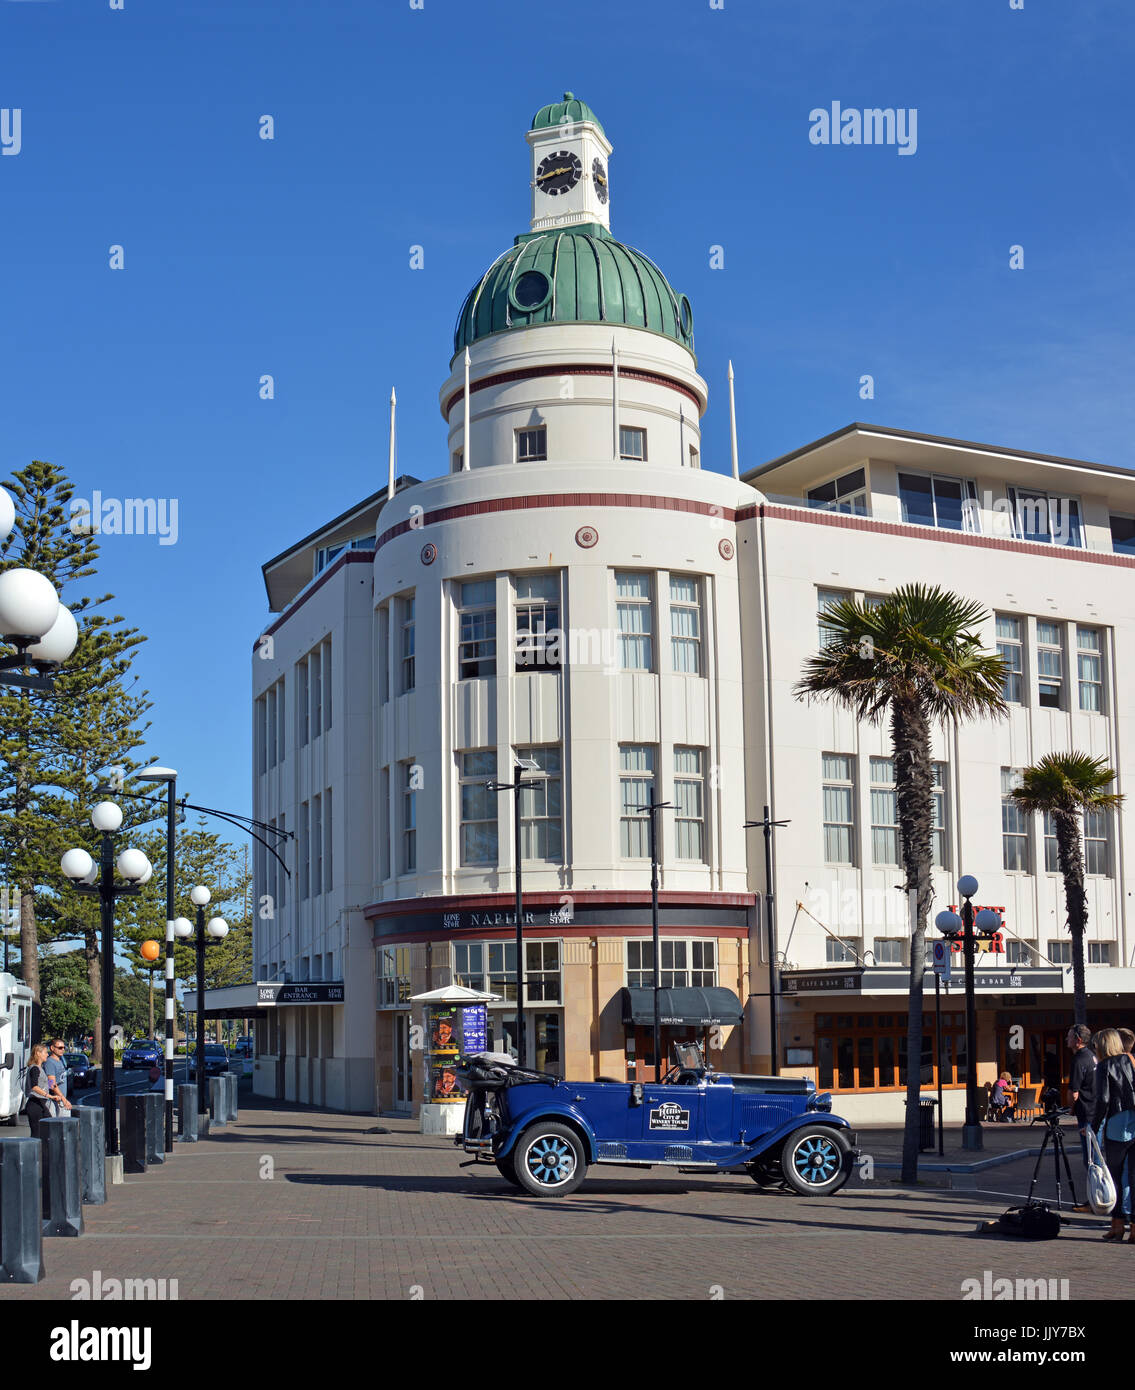 Napier - New Zeland - April 27, 2017: The T&G Building Is an example of the Art Deco style of architecture from the early 1930's. In the foreground is Stock Photo